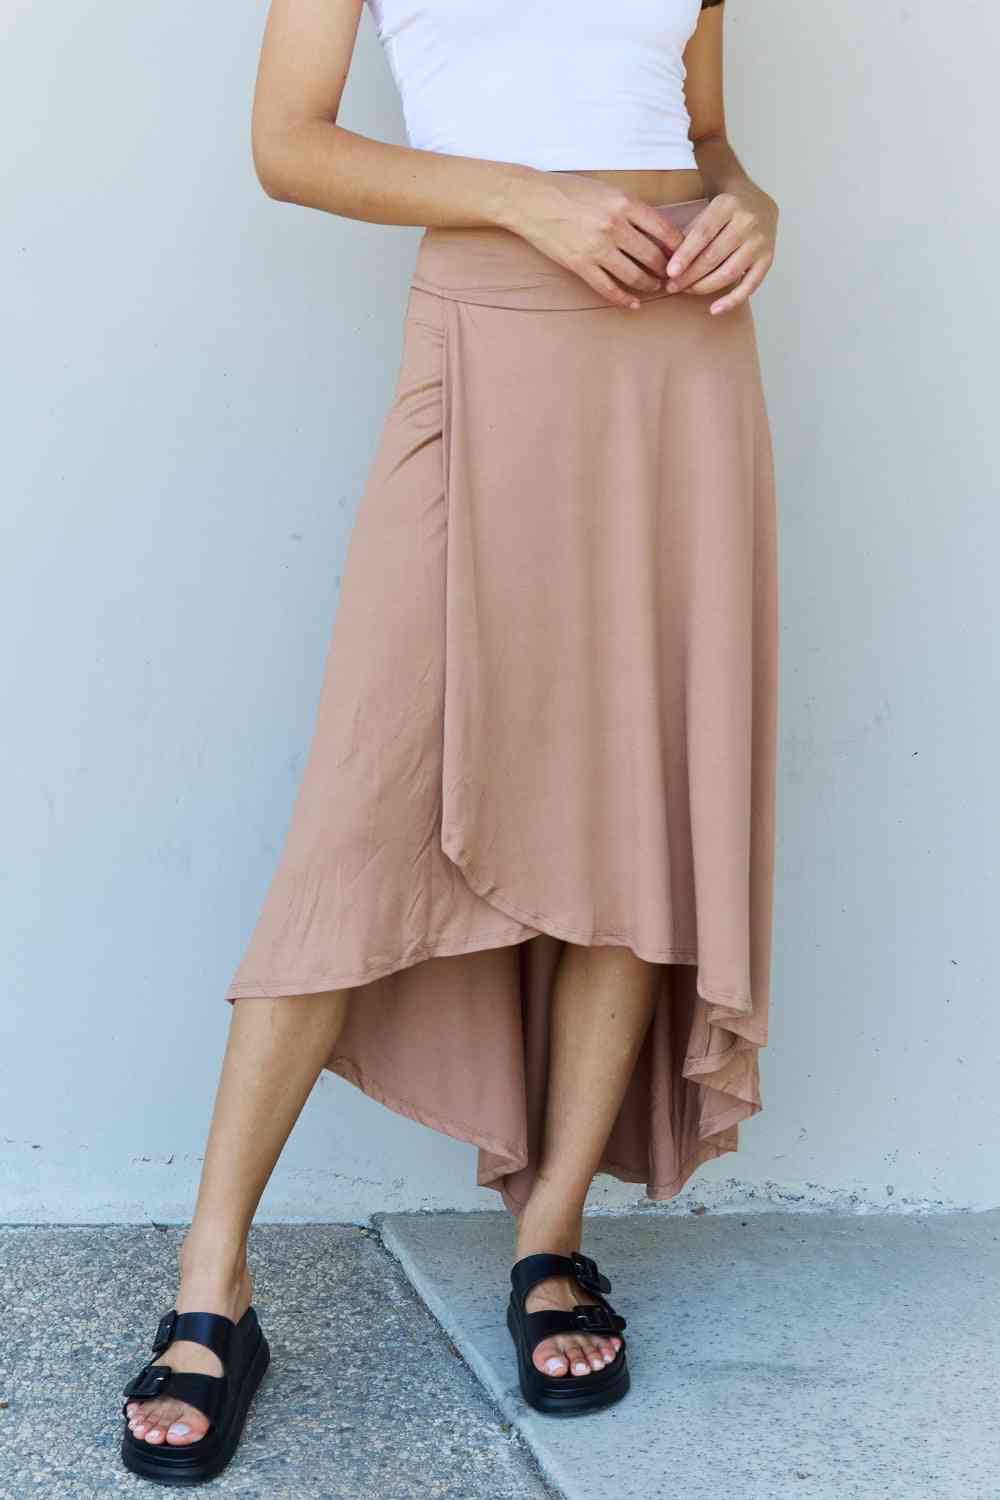 The802Gypsy Bottoms/skirts Camel / S ❤GYPSY-Ninexis-First Choice Flare Maxi Skirt